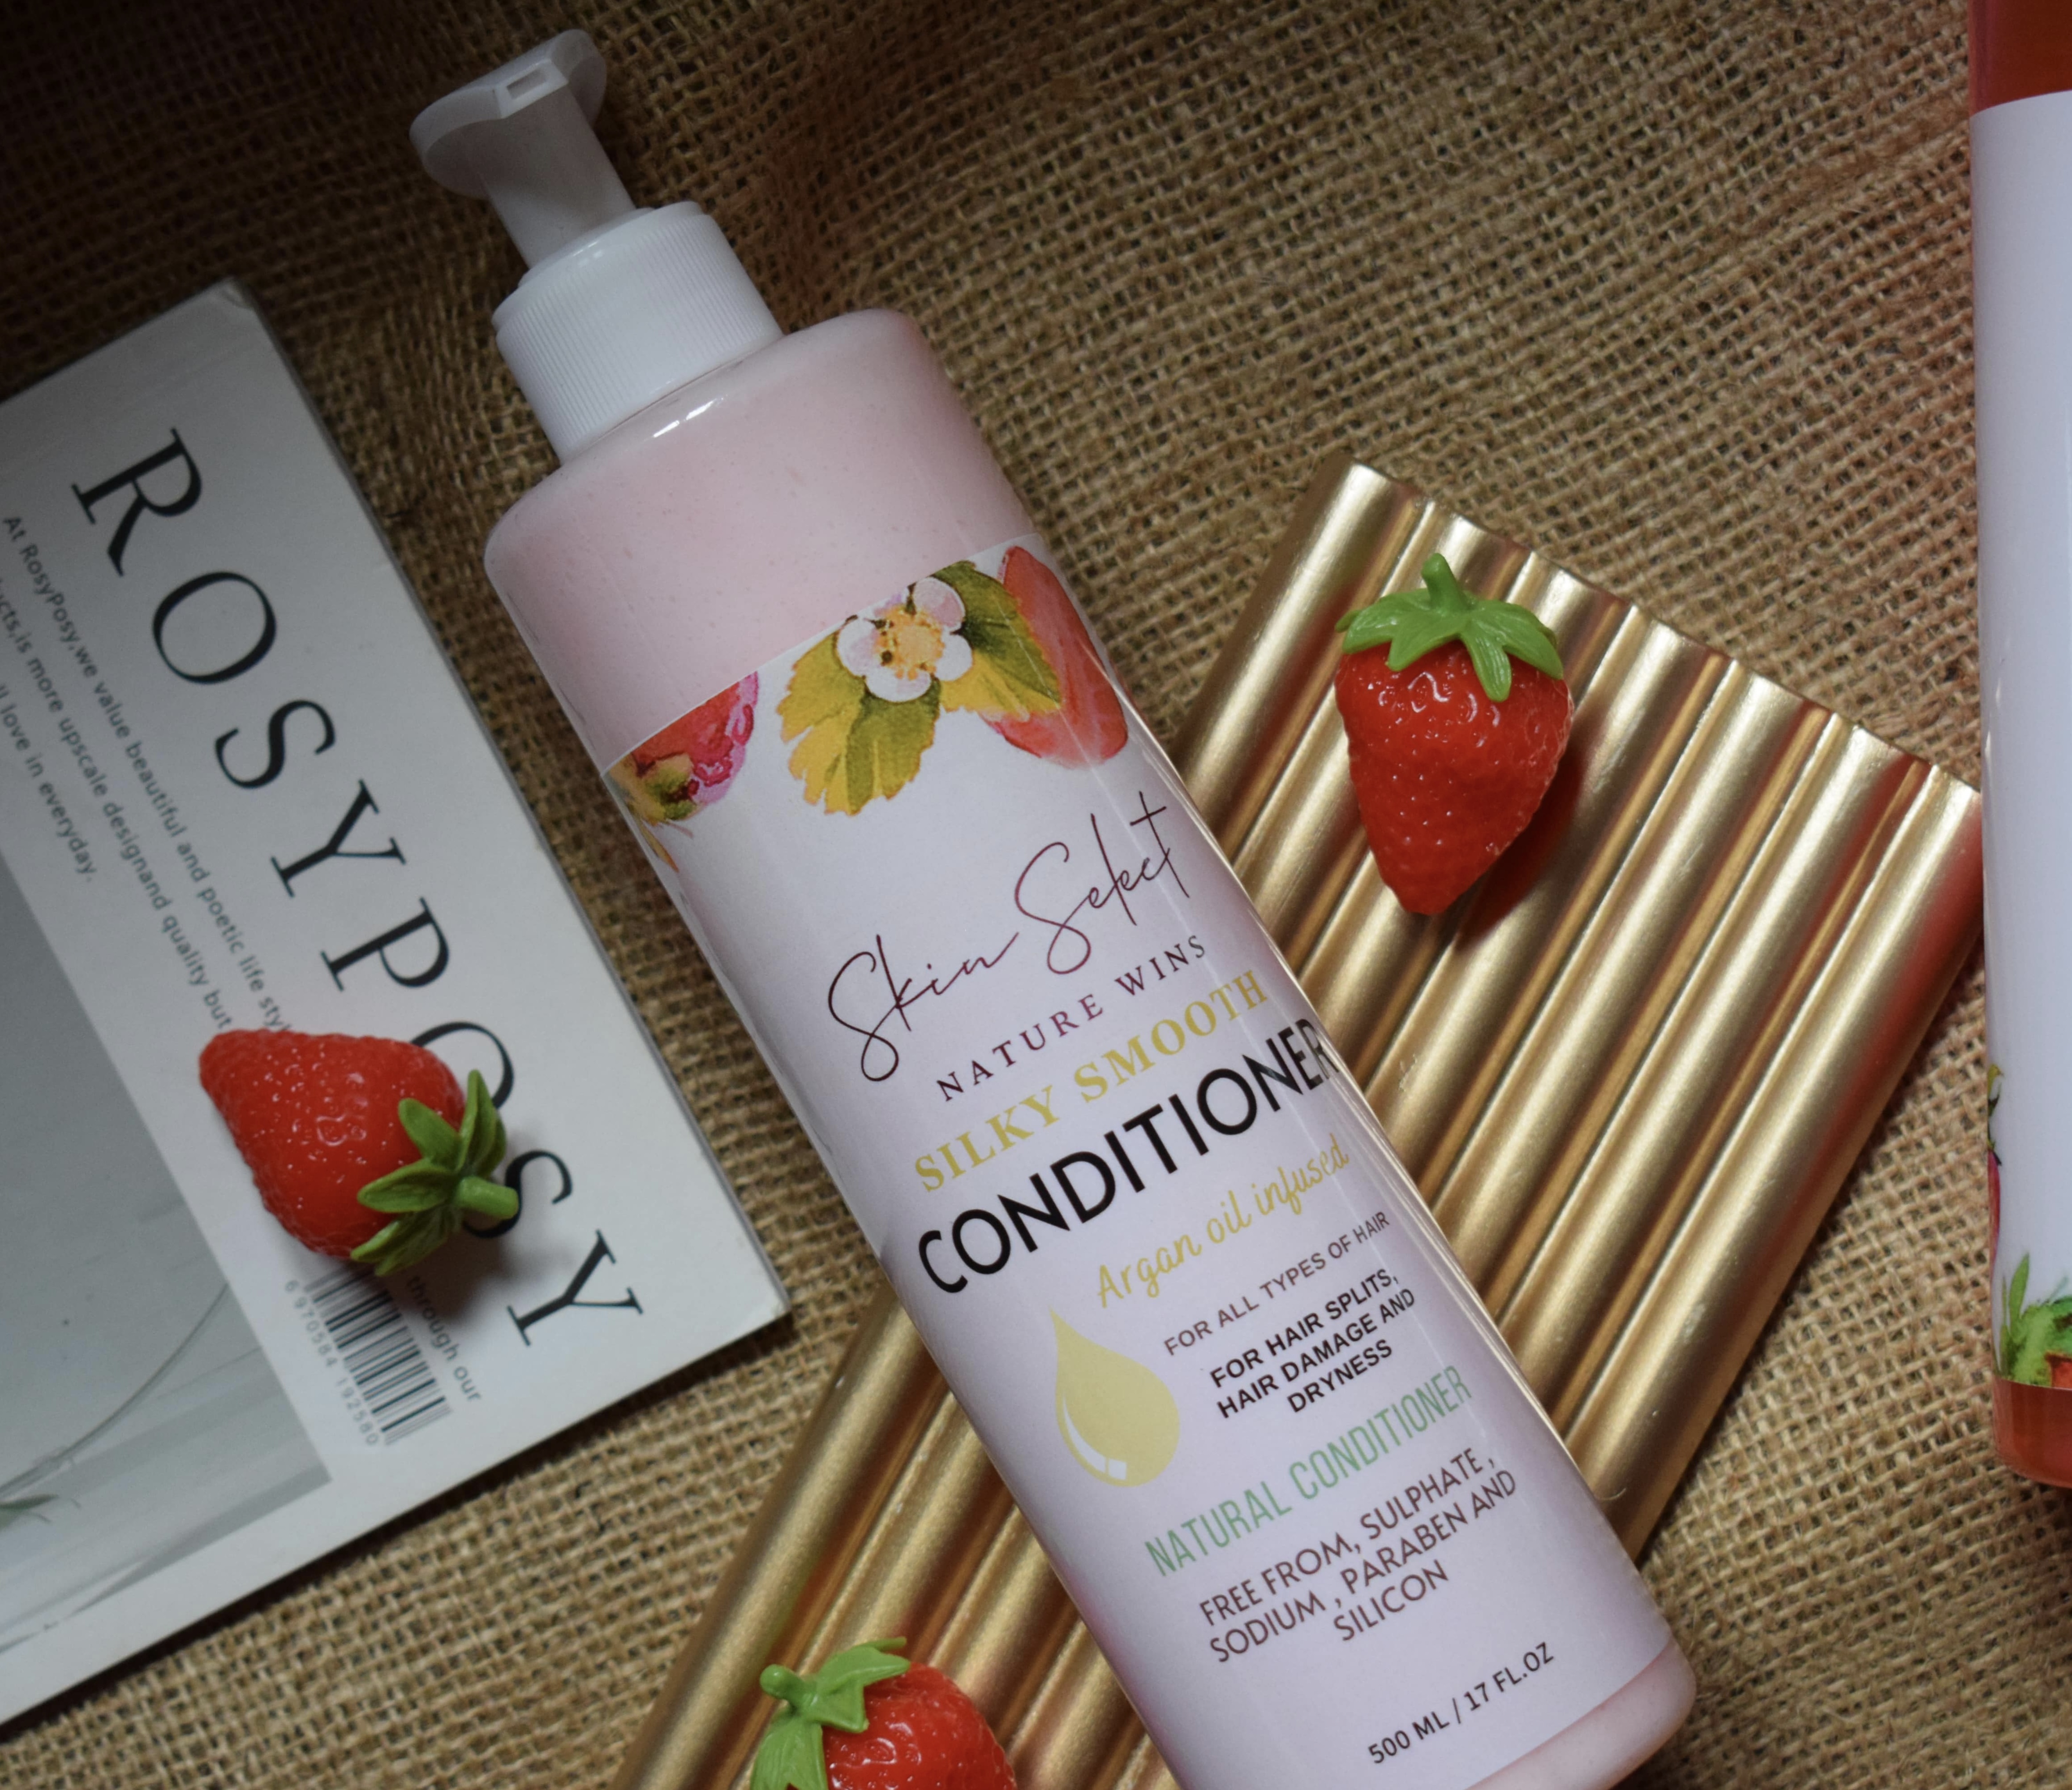 Silky smooth hair conditioner